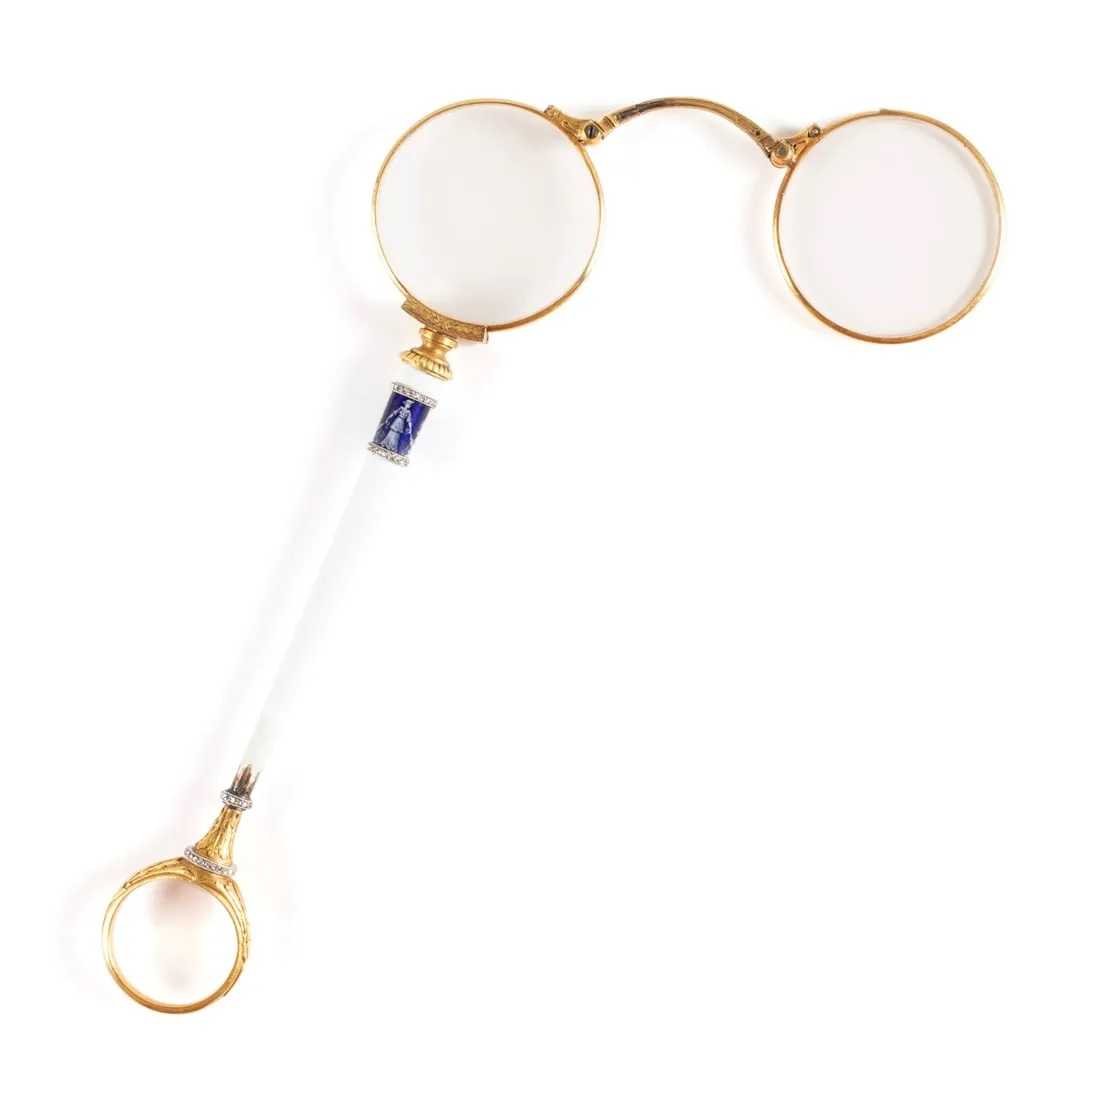 Napoleonic-era enamel lorgnette, which hammered for $3,250 and sold for $4,225 with buyer’s premium at Selkirk Auctioneers on March 15.